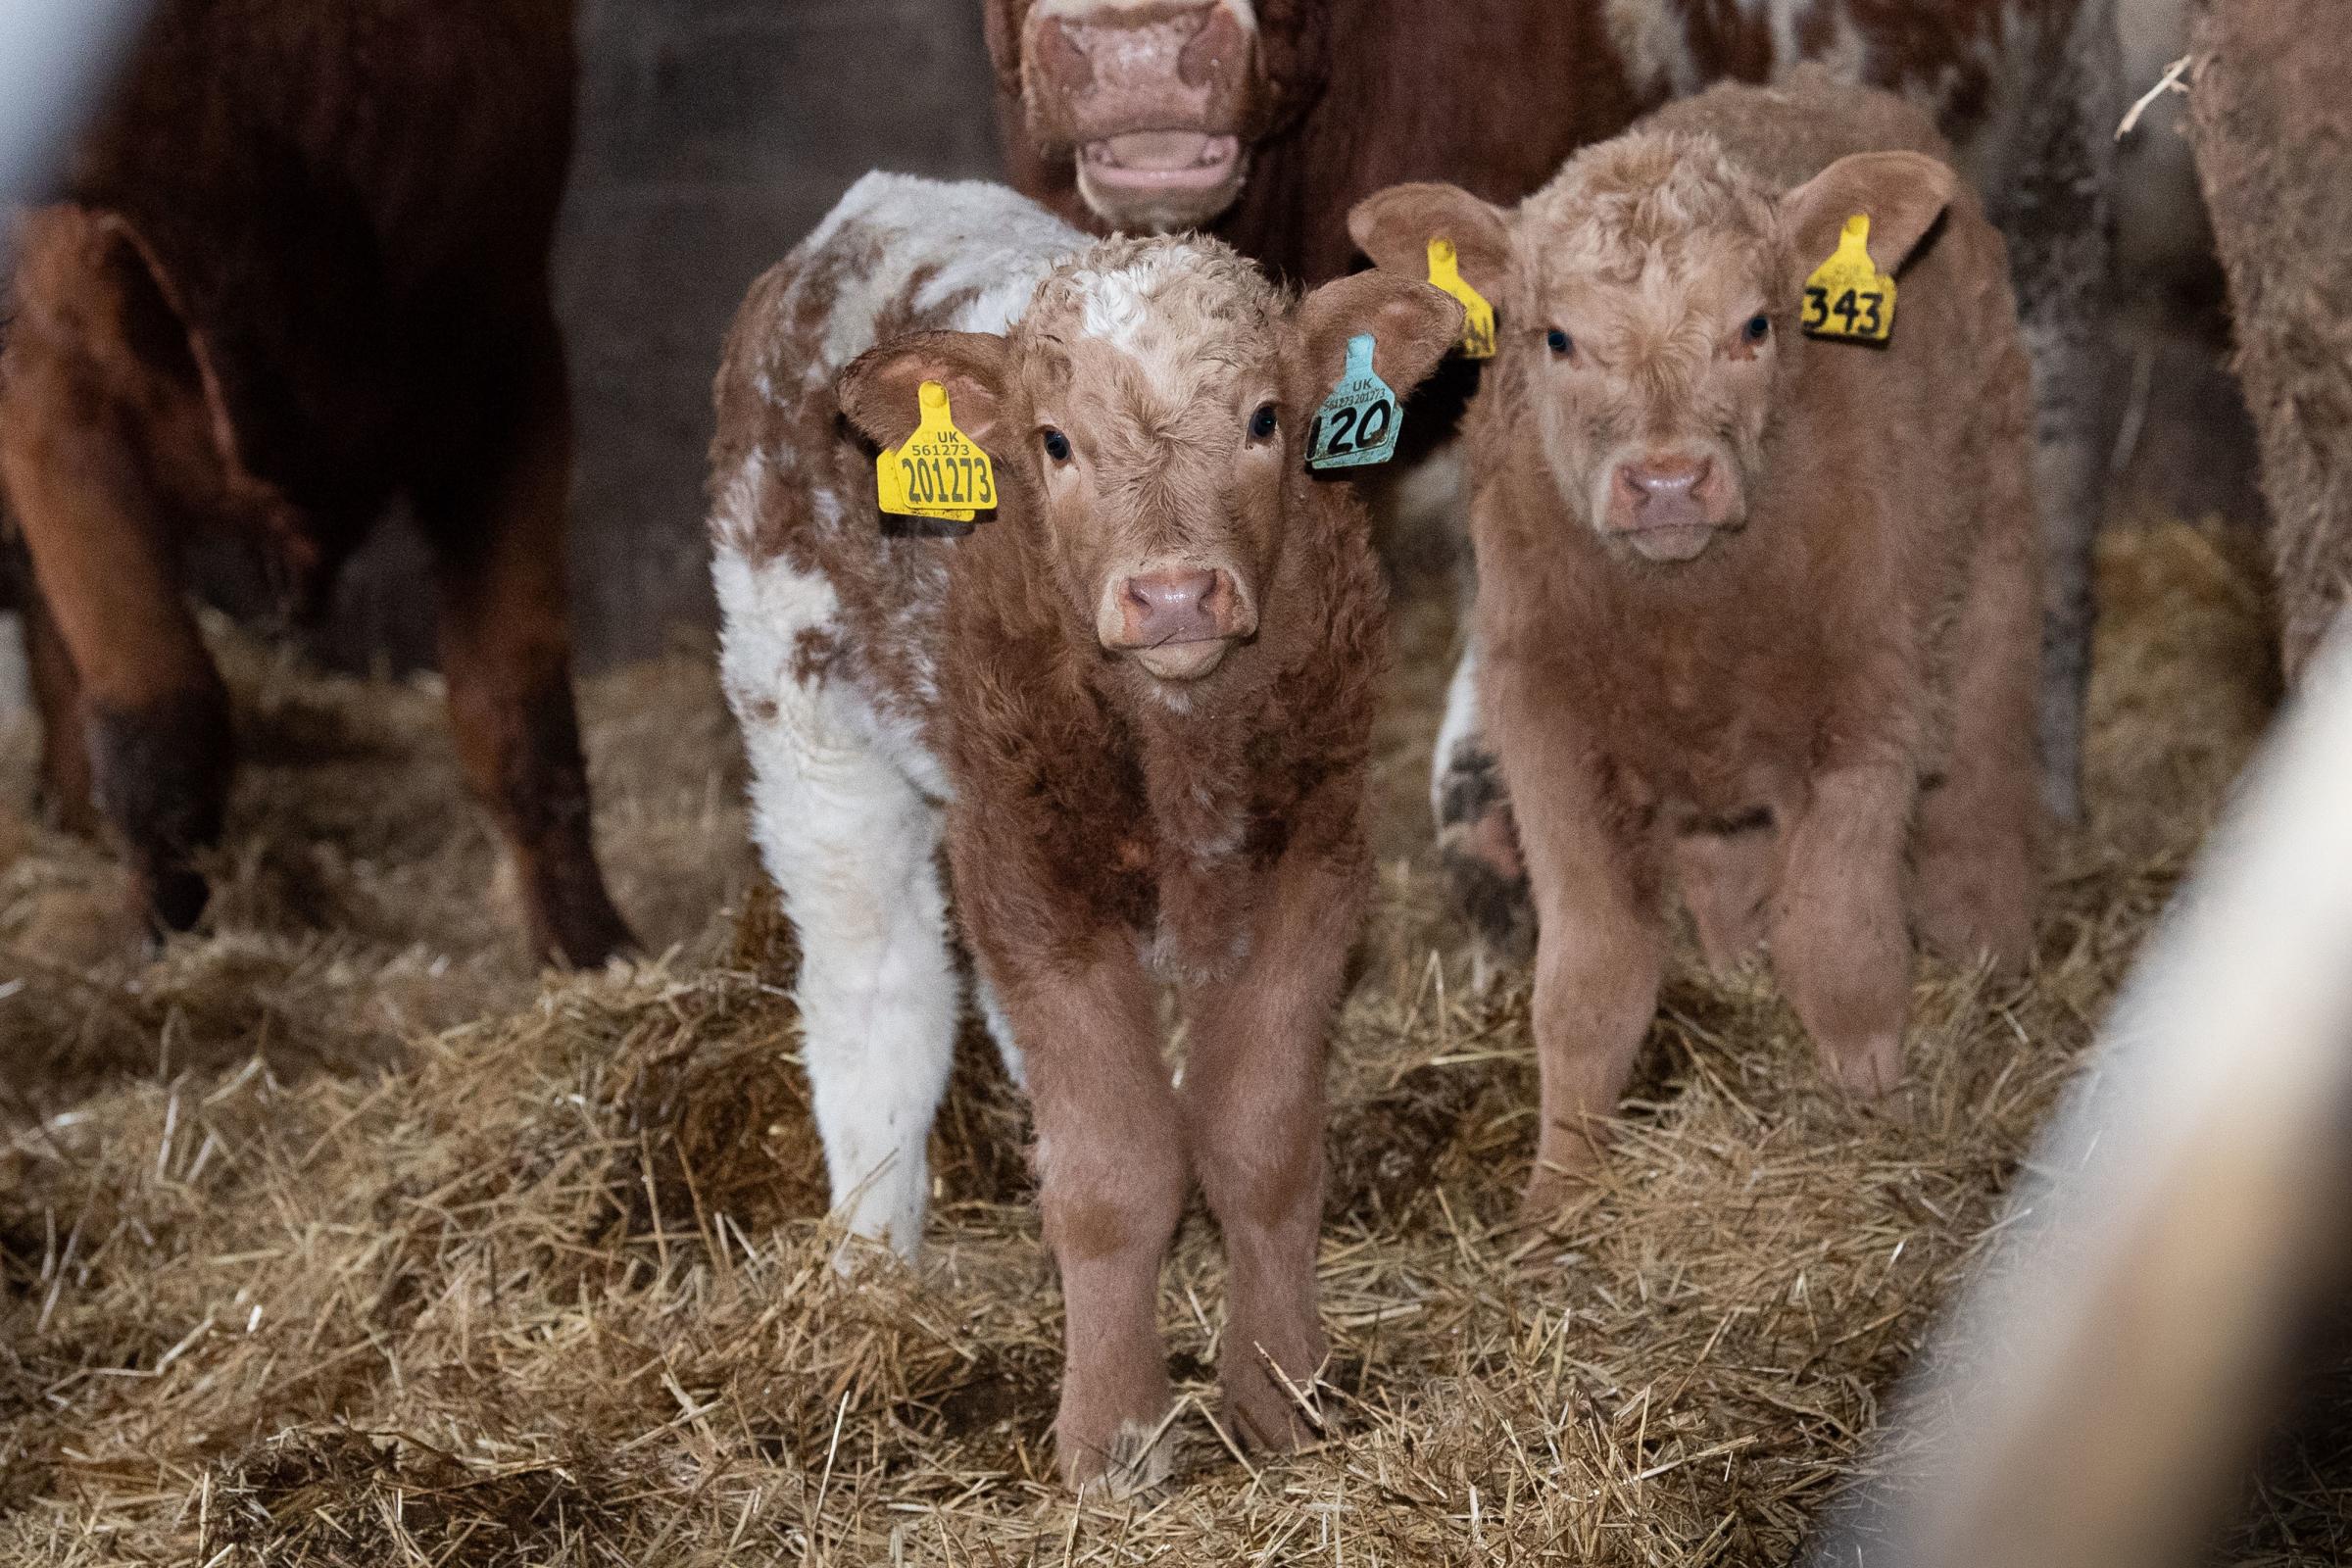 The Sim-Luing provides the best of both worlds, having the hardiness as well as the power to produce a strong Charolais cross store calf Ref:RH210121190 Rob Haining / The Scottish Farmer...